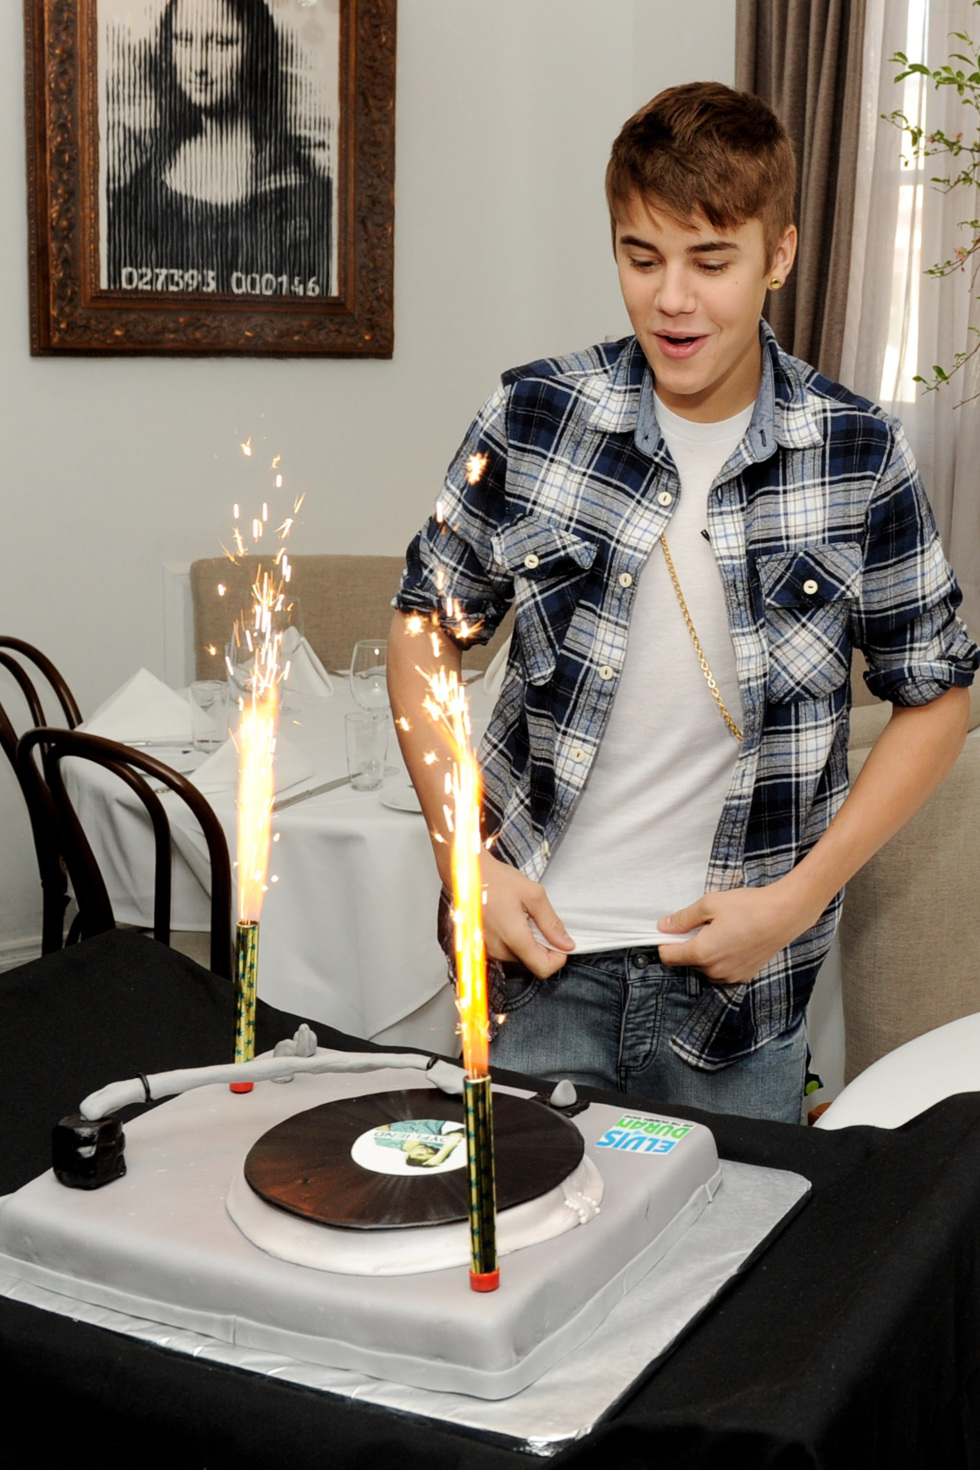 Justin Bieber Exclusive Interview With Elvis Duran Of "The Elvis Duran Morning Show"